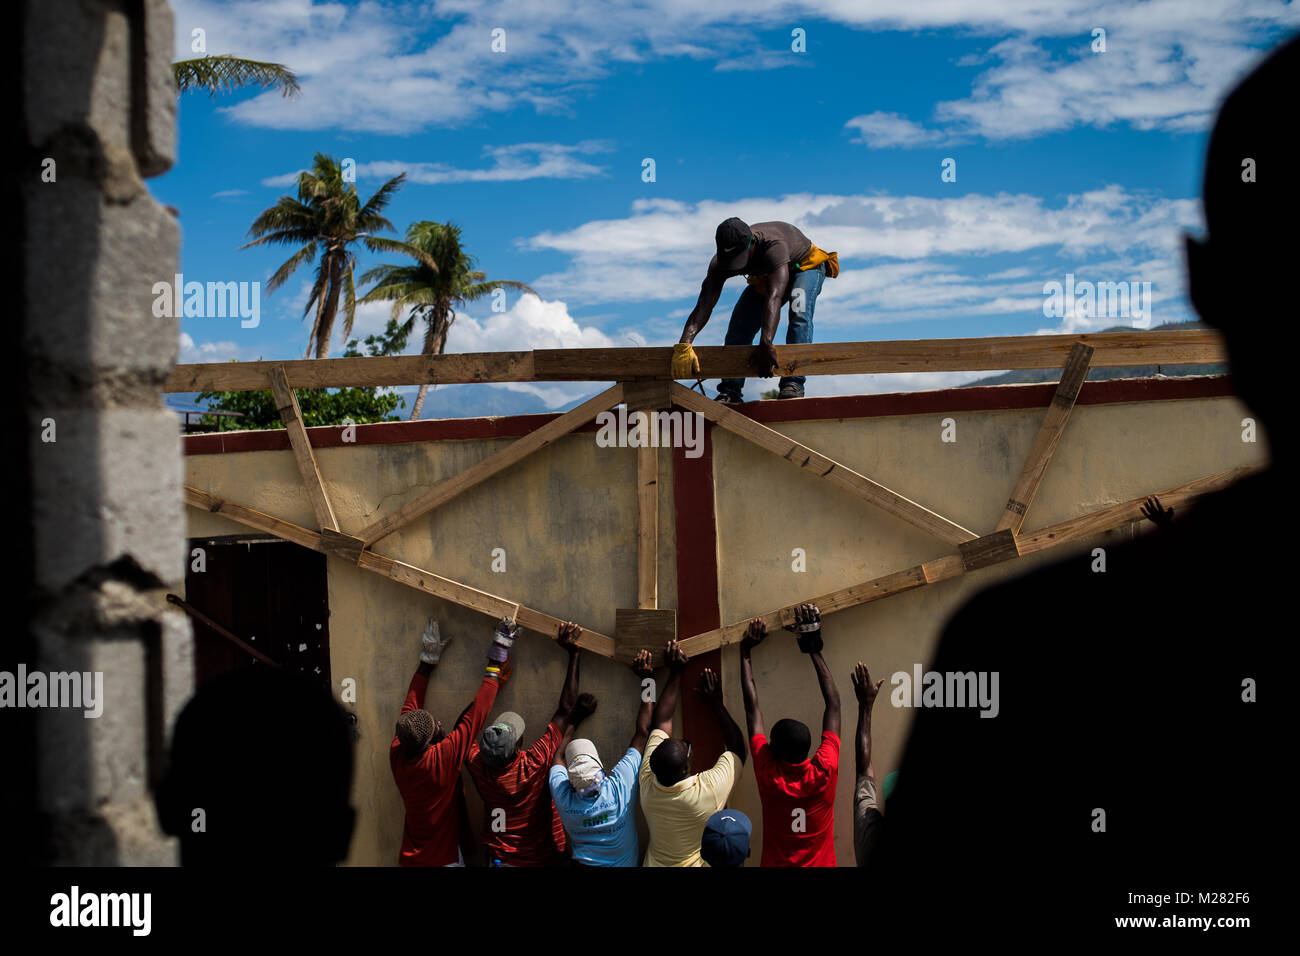 Construction continues on a school that was destroyed by Hurricane Matthew in Haiti. Stock Photo